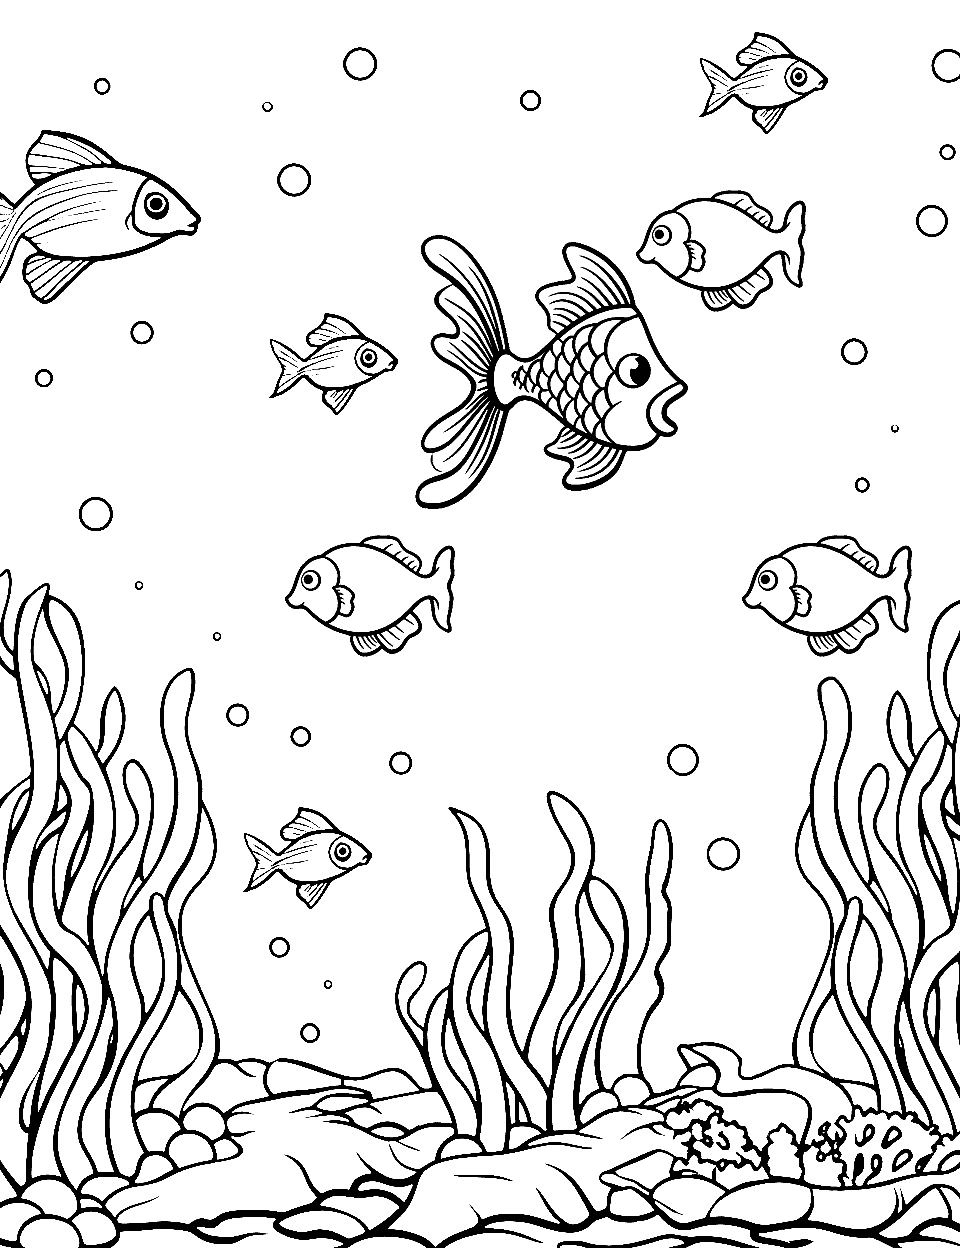 Coral Reef Under the Sea Coloring Page - A coral reef with fish swimming among the corals.